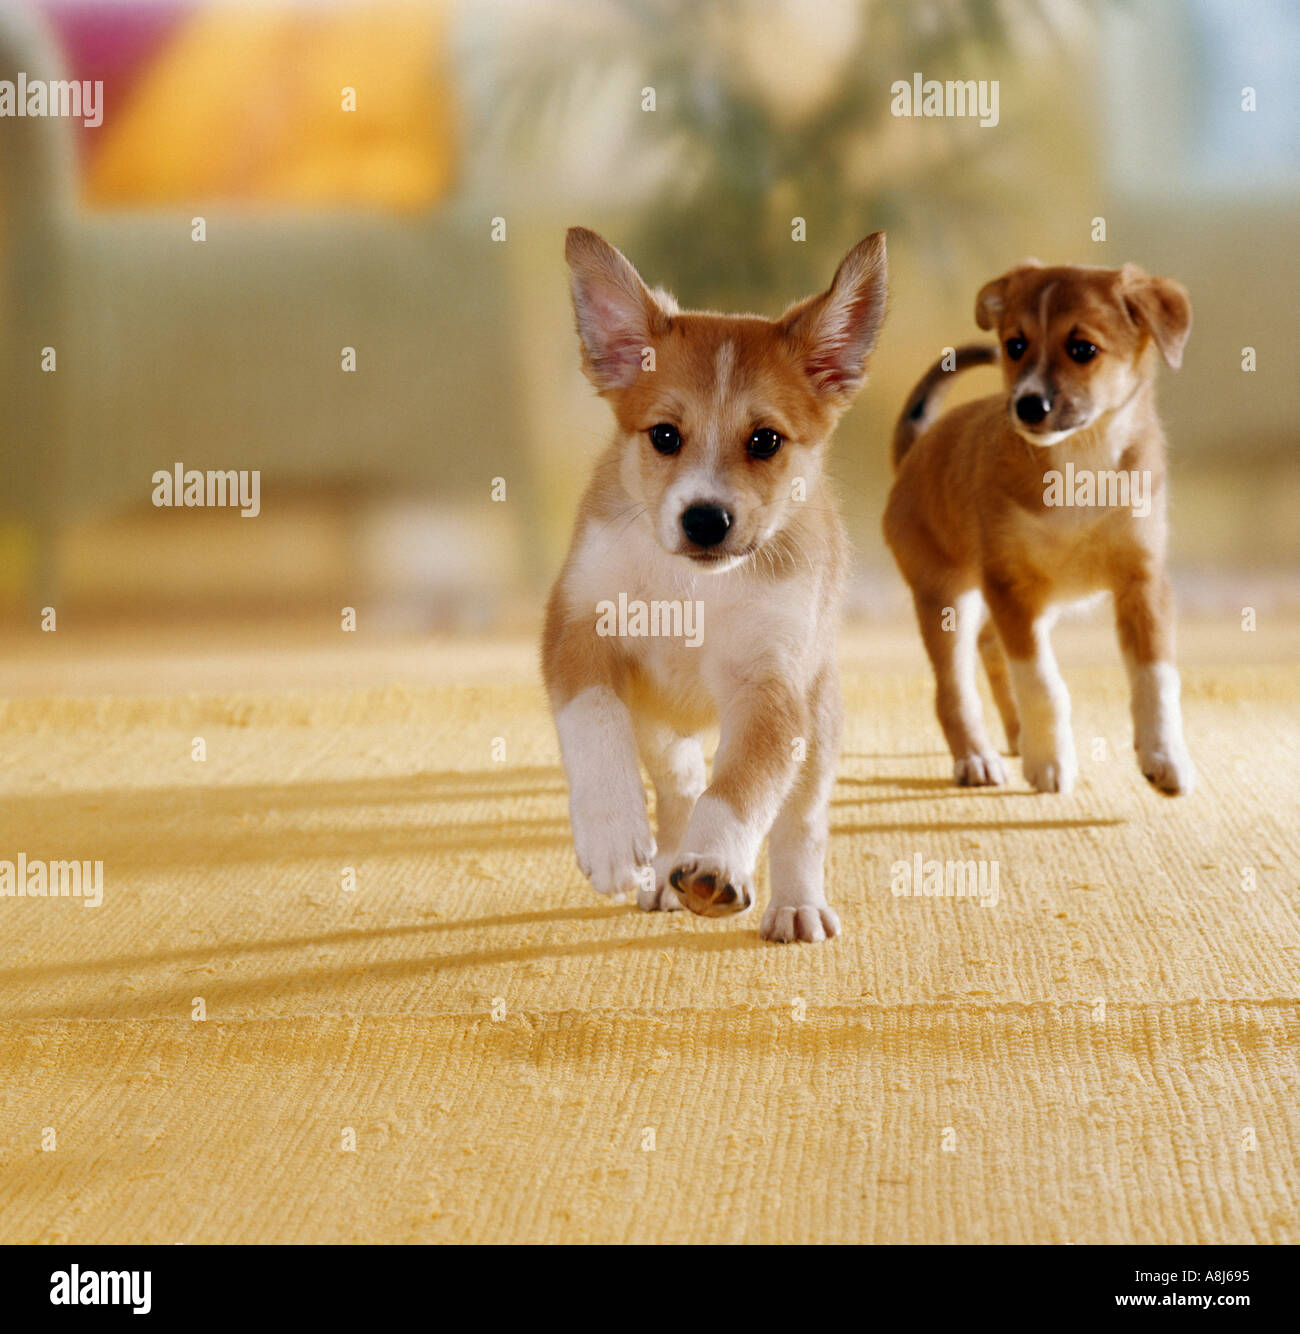 two half breed dog puppies - running Stock Photo